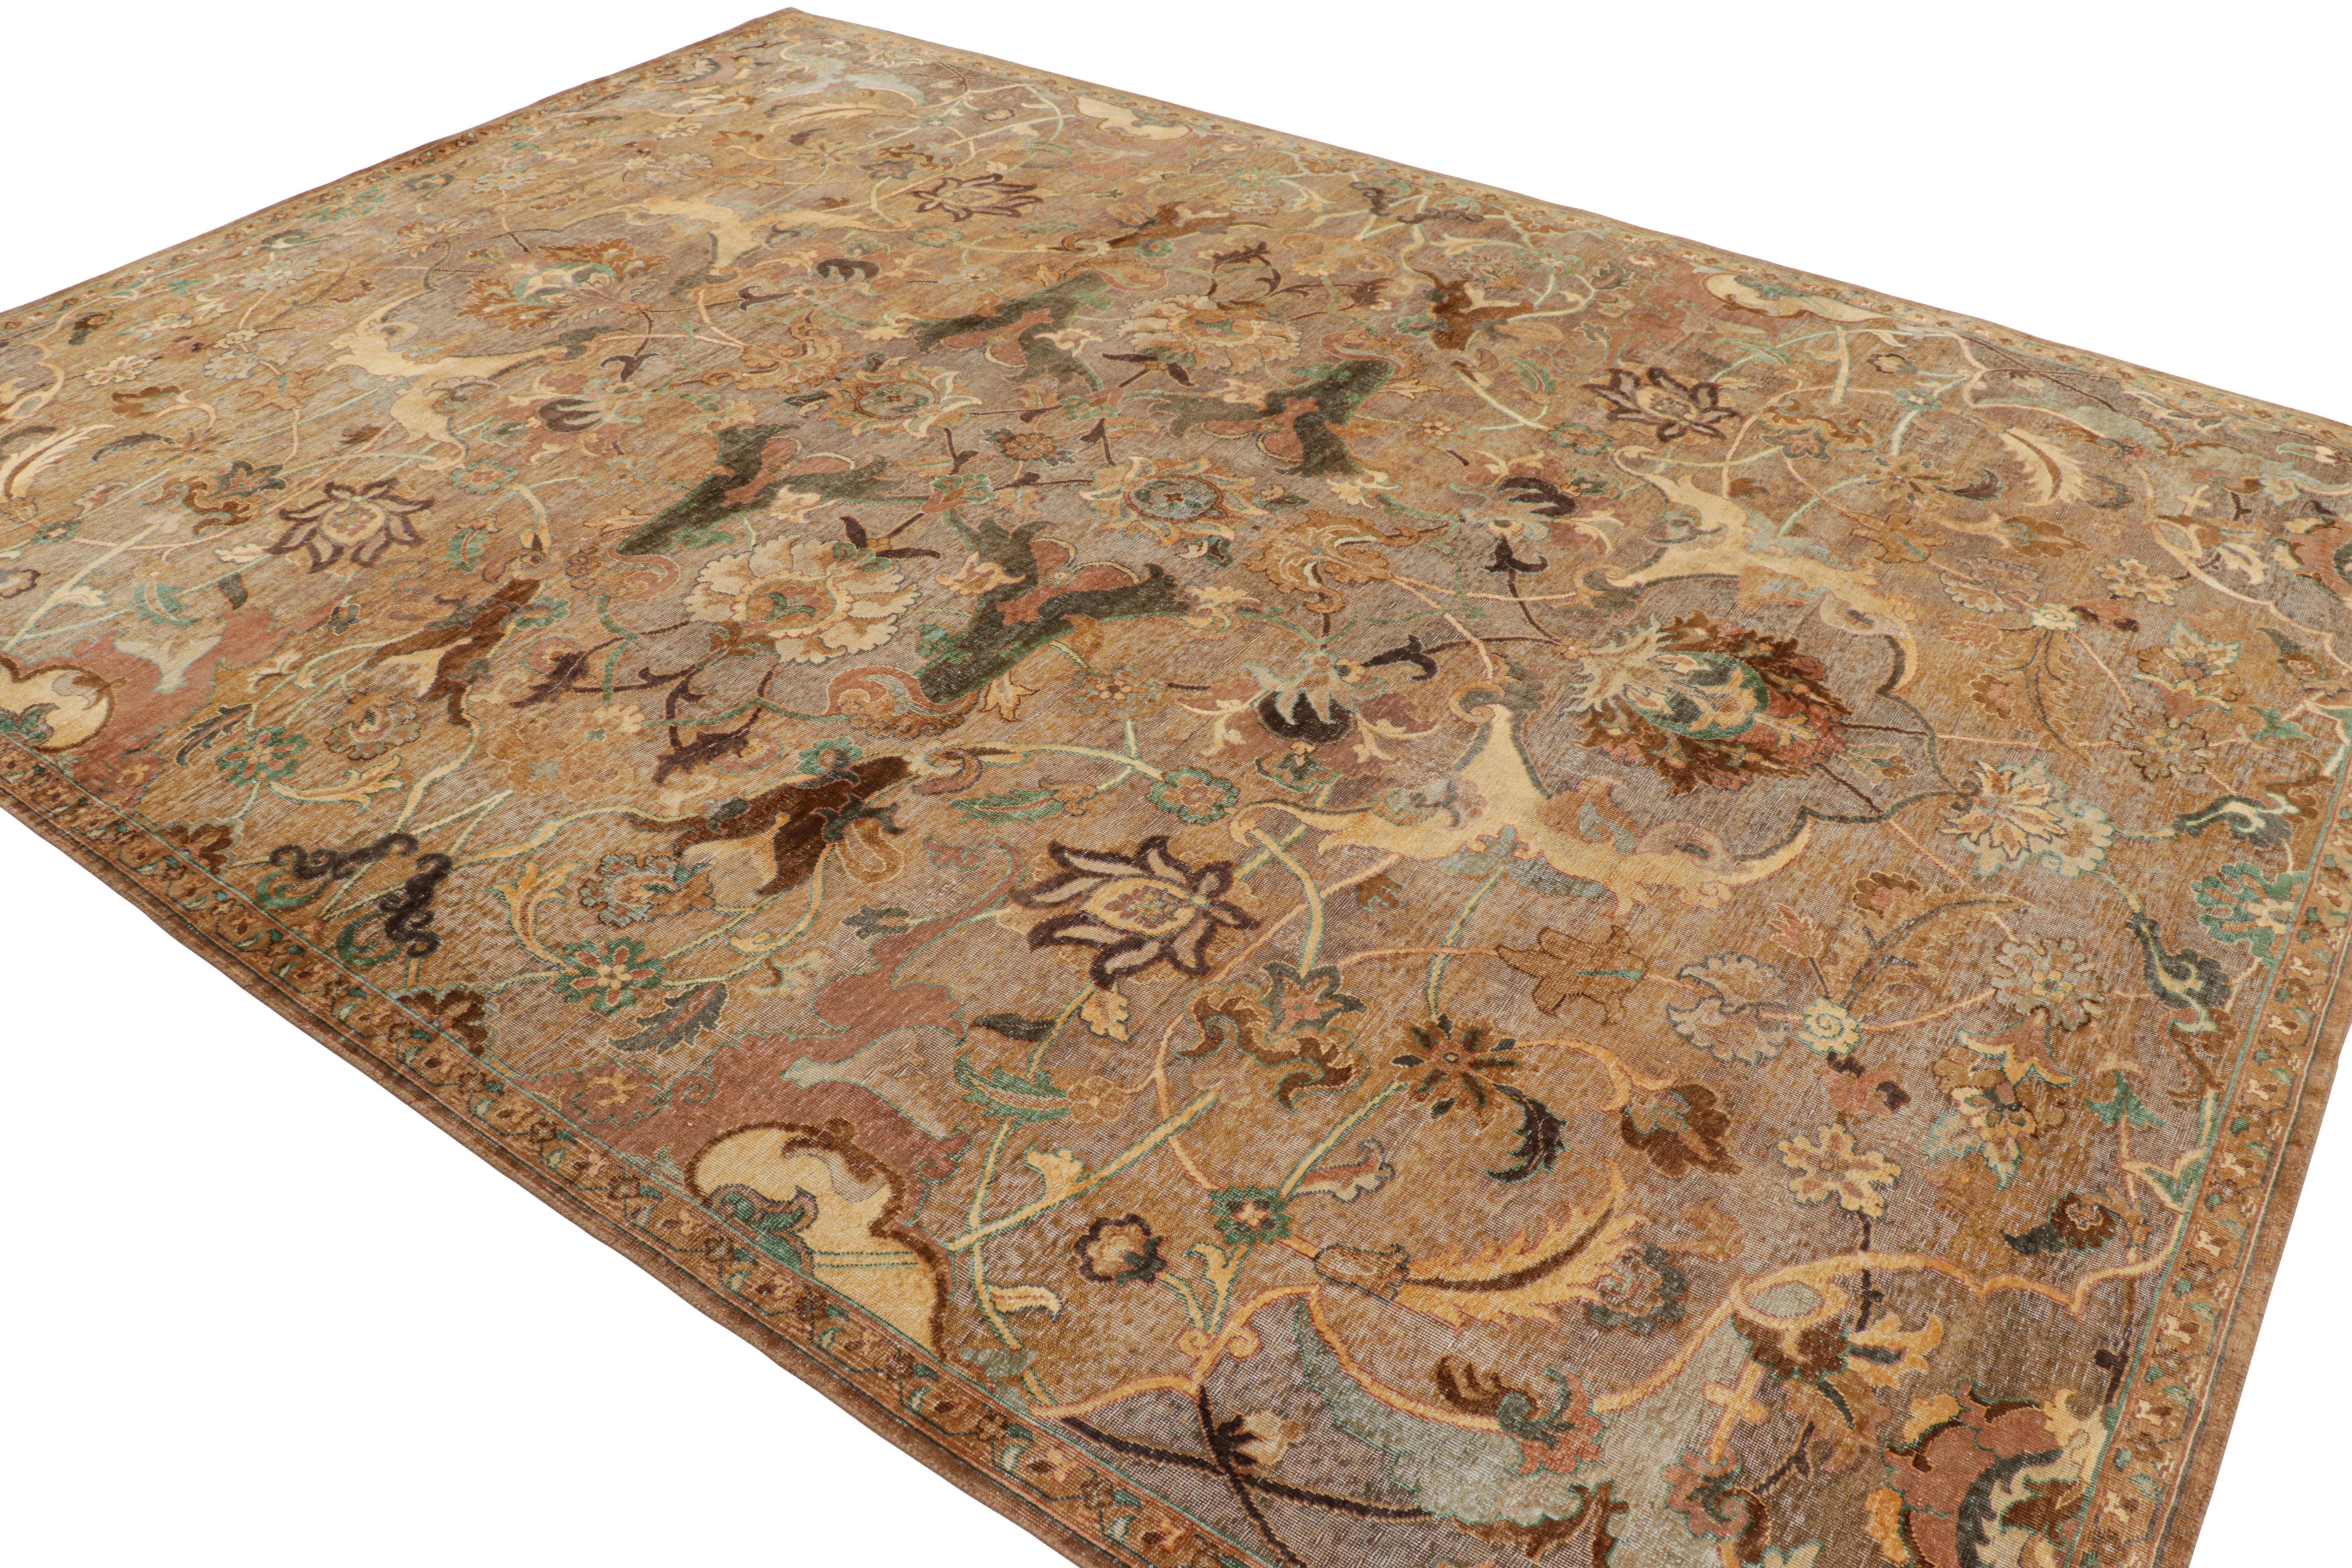 Hand-Knotted Rug & Kilim’s Polonaise Style Rug in Beige-Brown with Floral Patterns For Sale